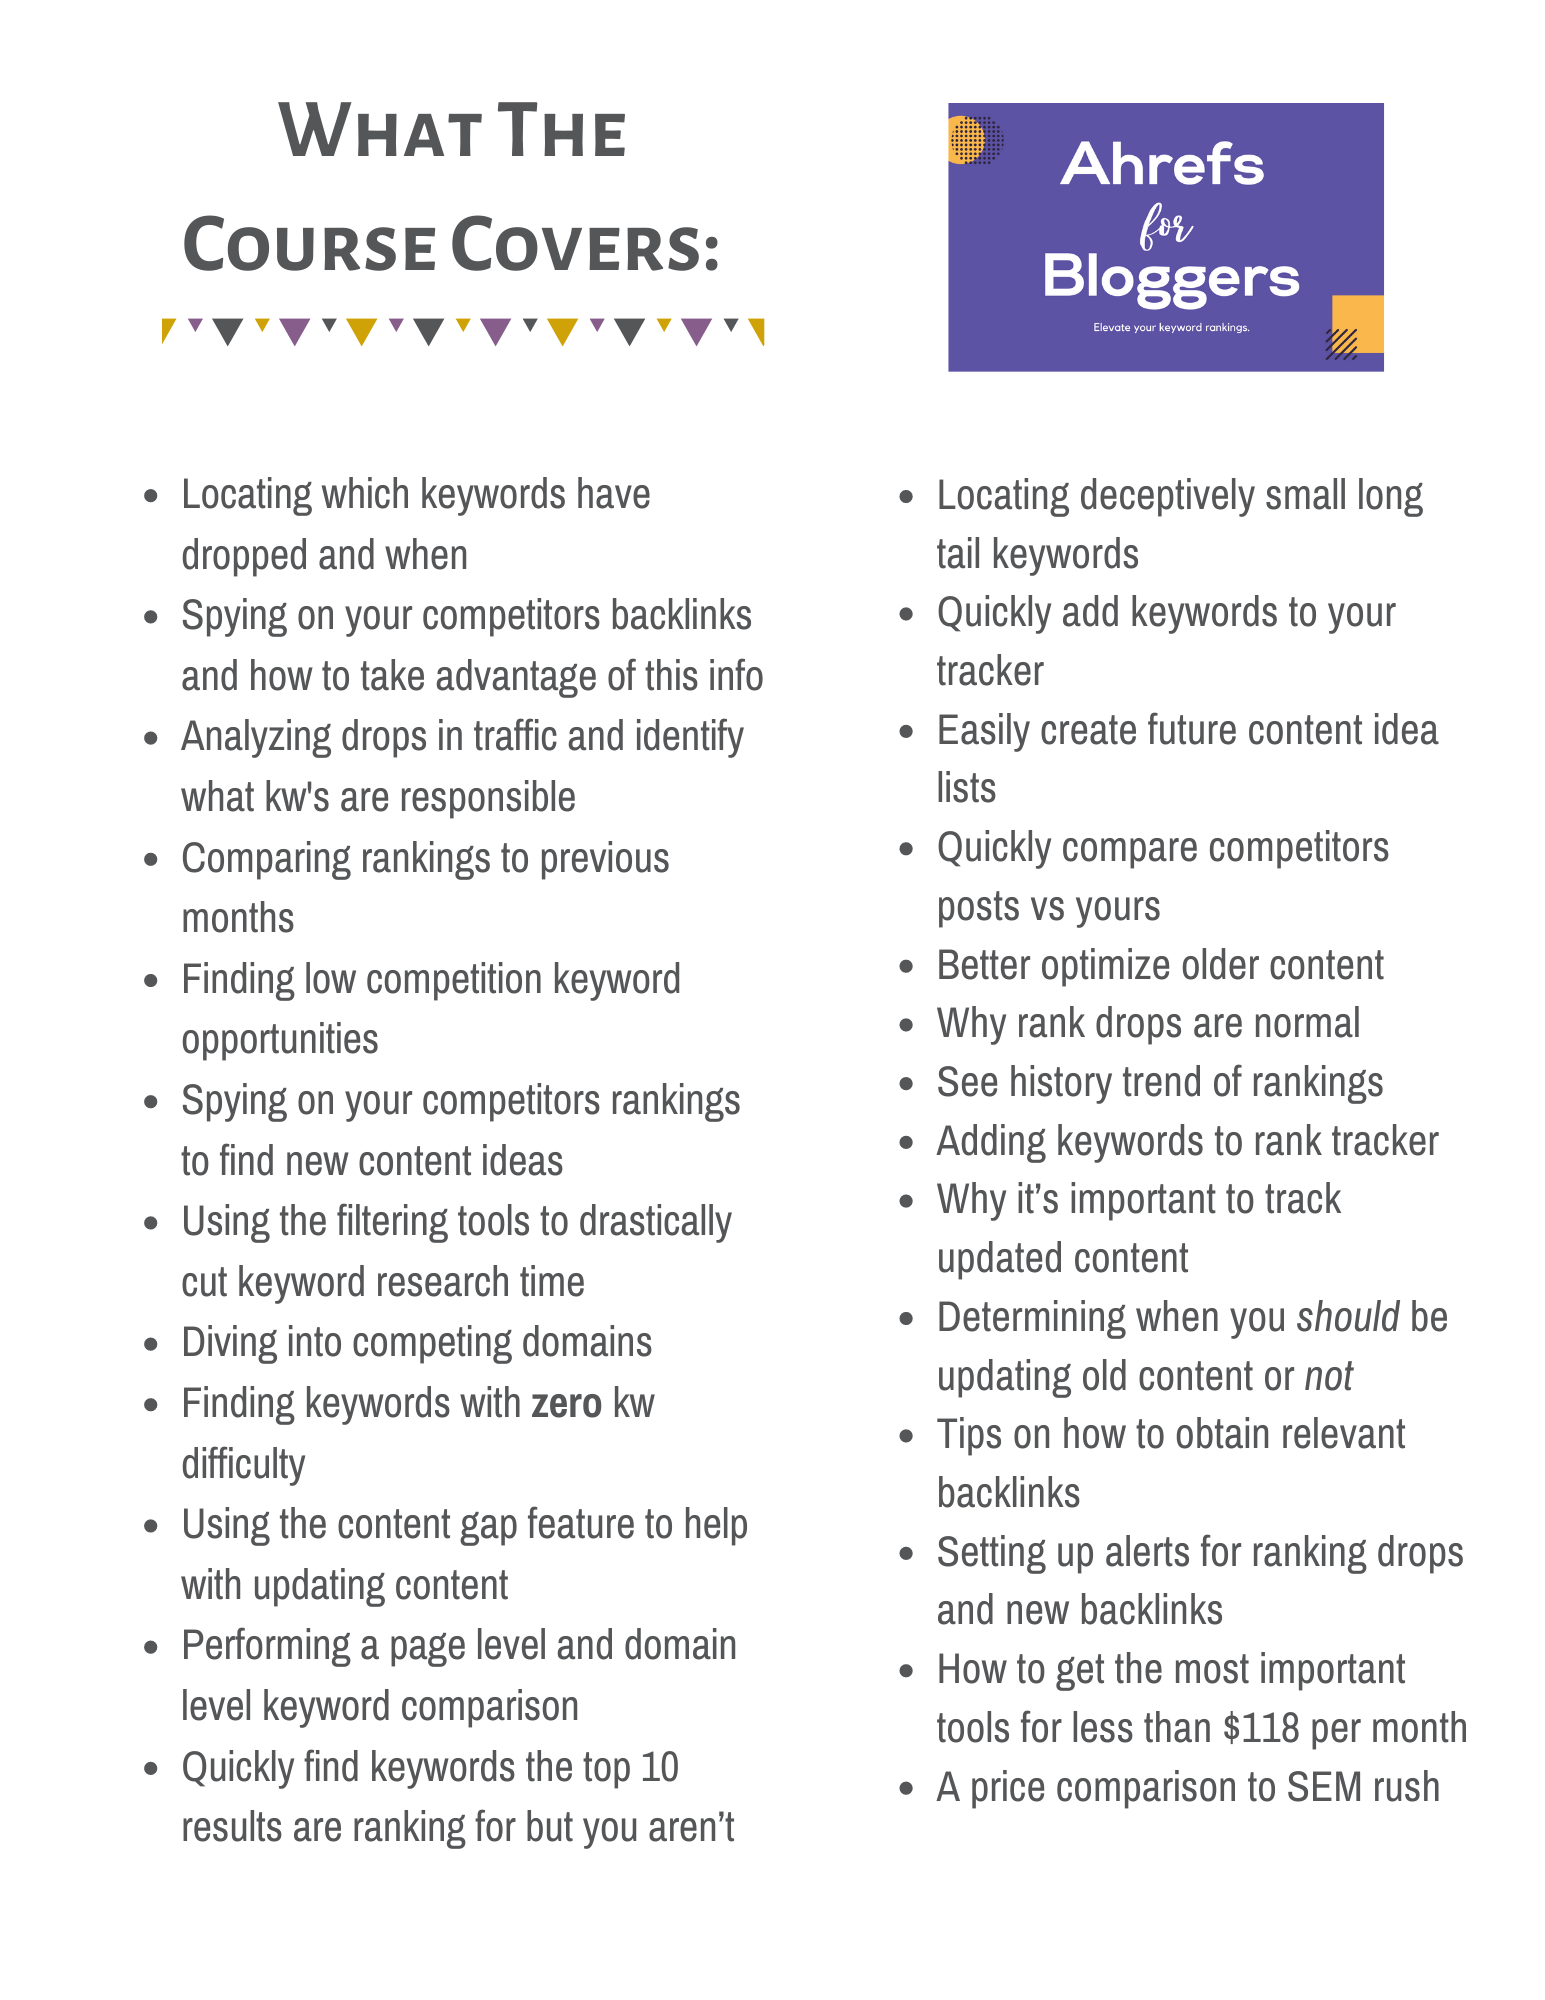 PDF of what the course covers.